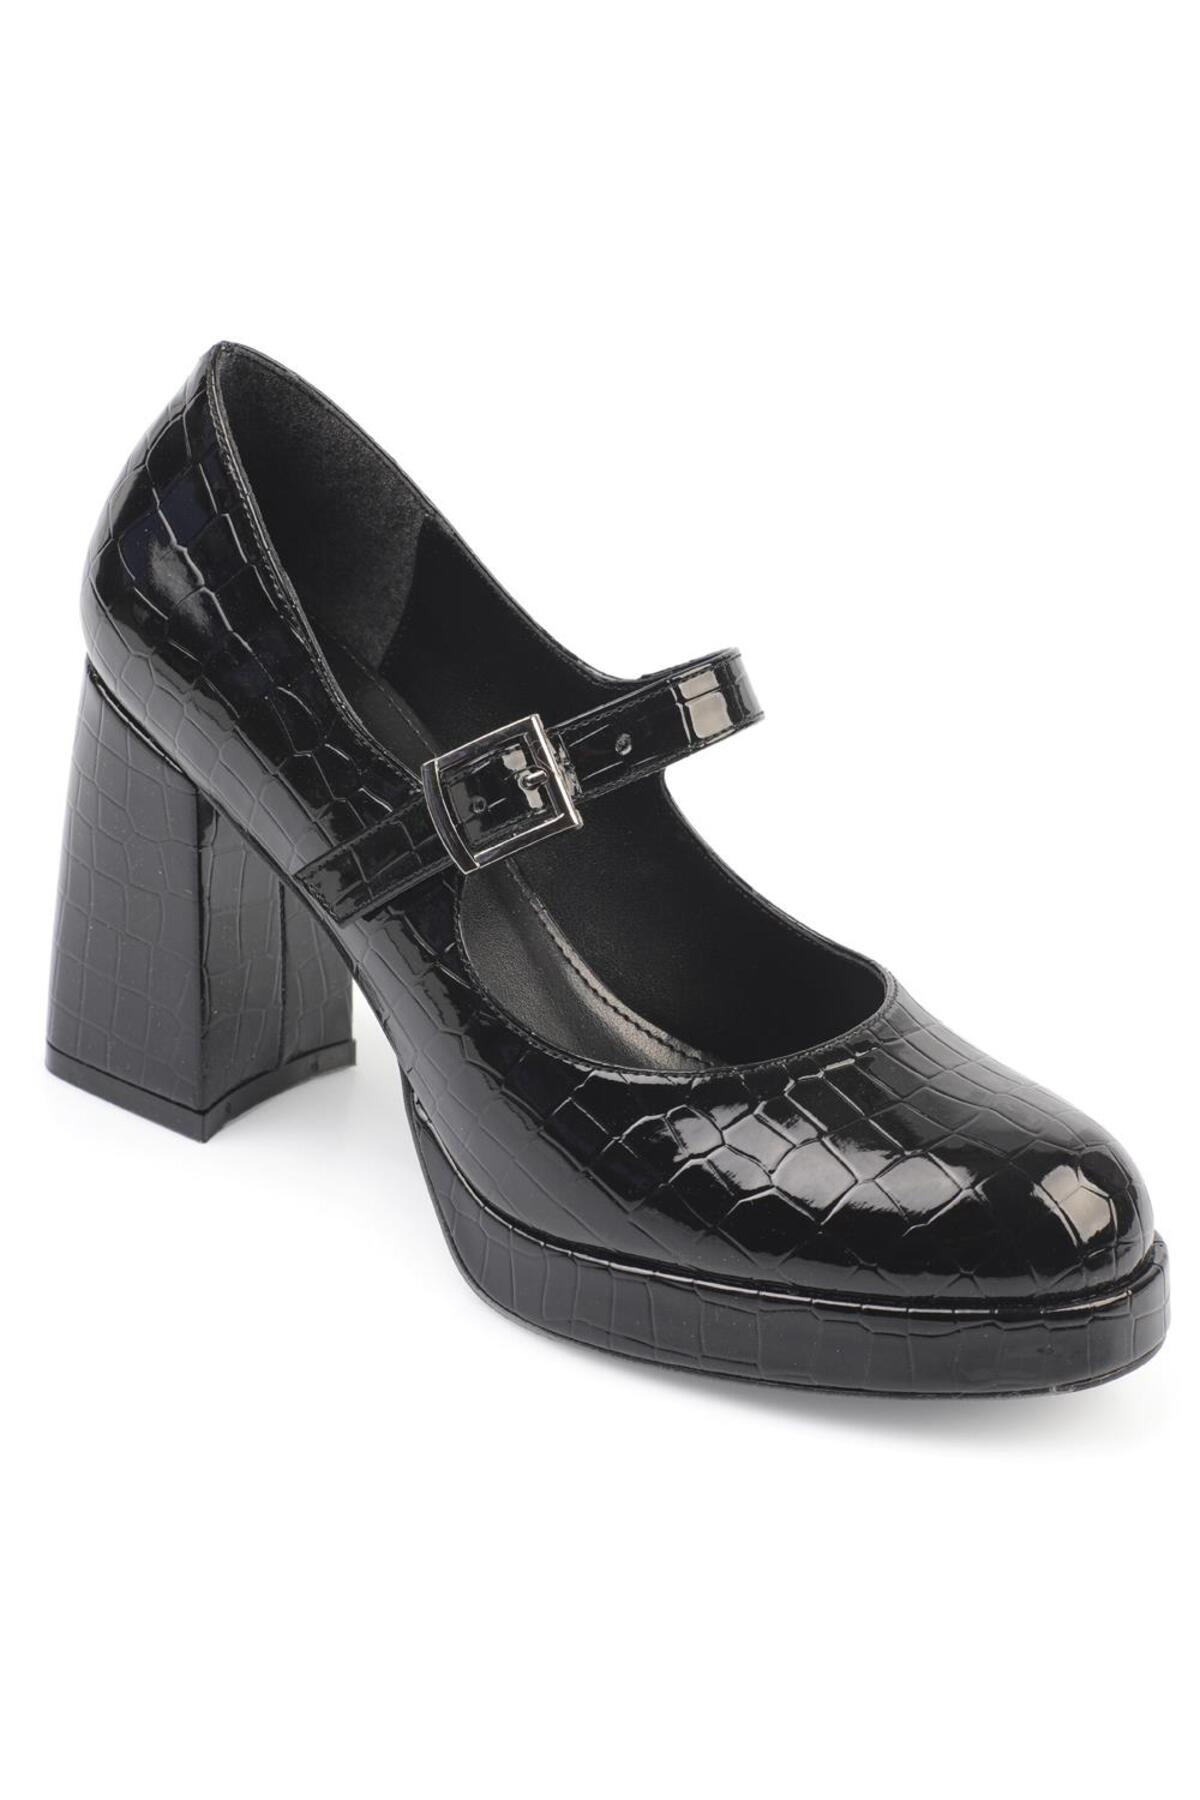 Capone Outfitters Capone Round Toe Banded Buckle Platform Women's Shoes